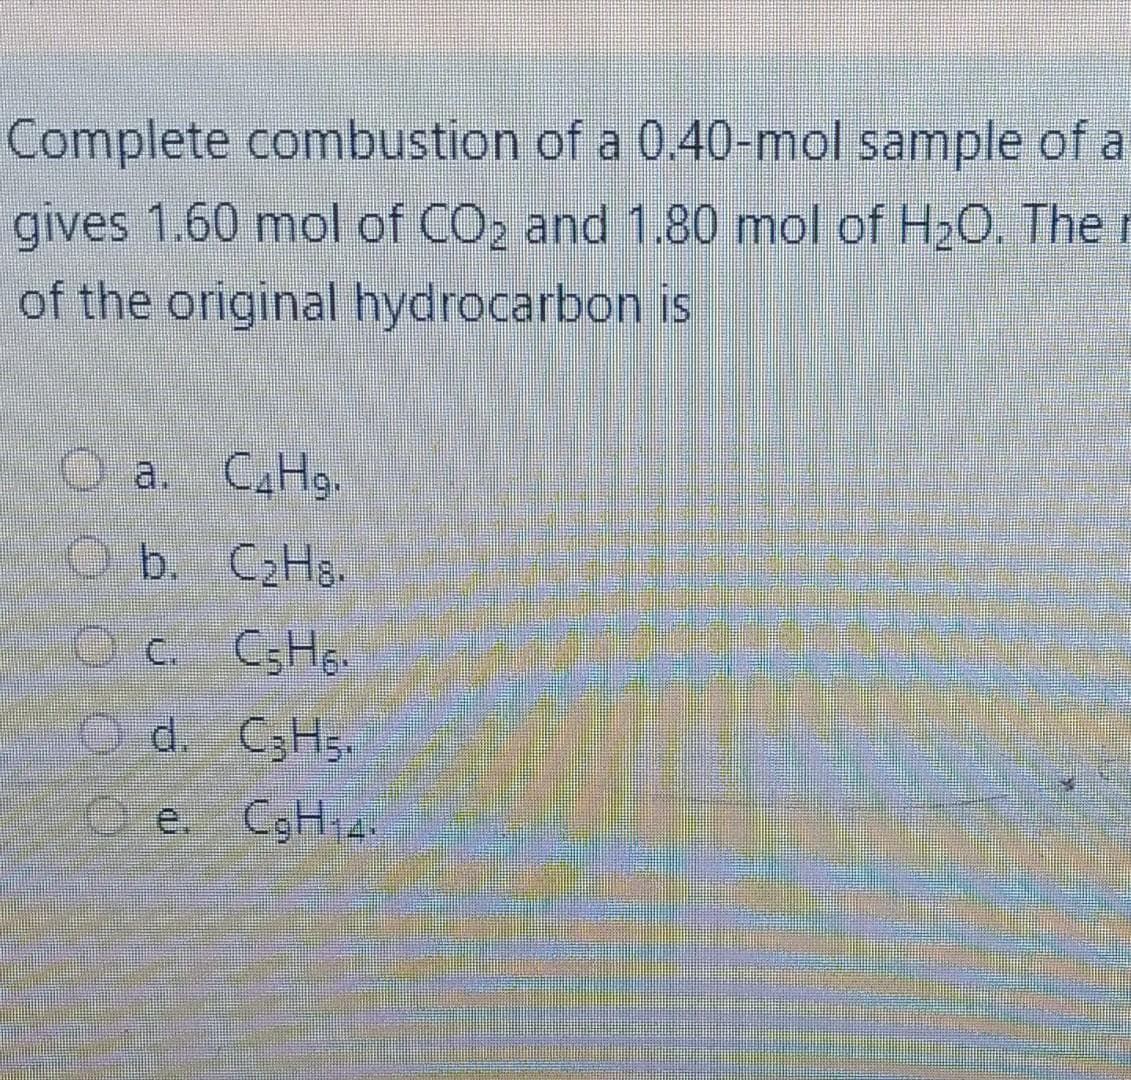 Complete combustion of a 0.40-mol sample of a
gives 1.60 mol of CO2 and 1.80 mol of H2O. The r
of the original hydrocarbon is
O a. CAH9.
O b. C2H8.
c. C;H..
Od. C3H5.
O e. CgH 4
